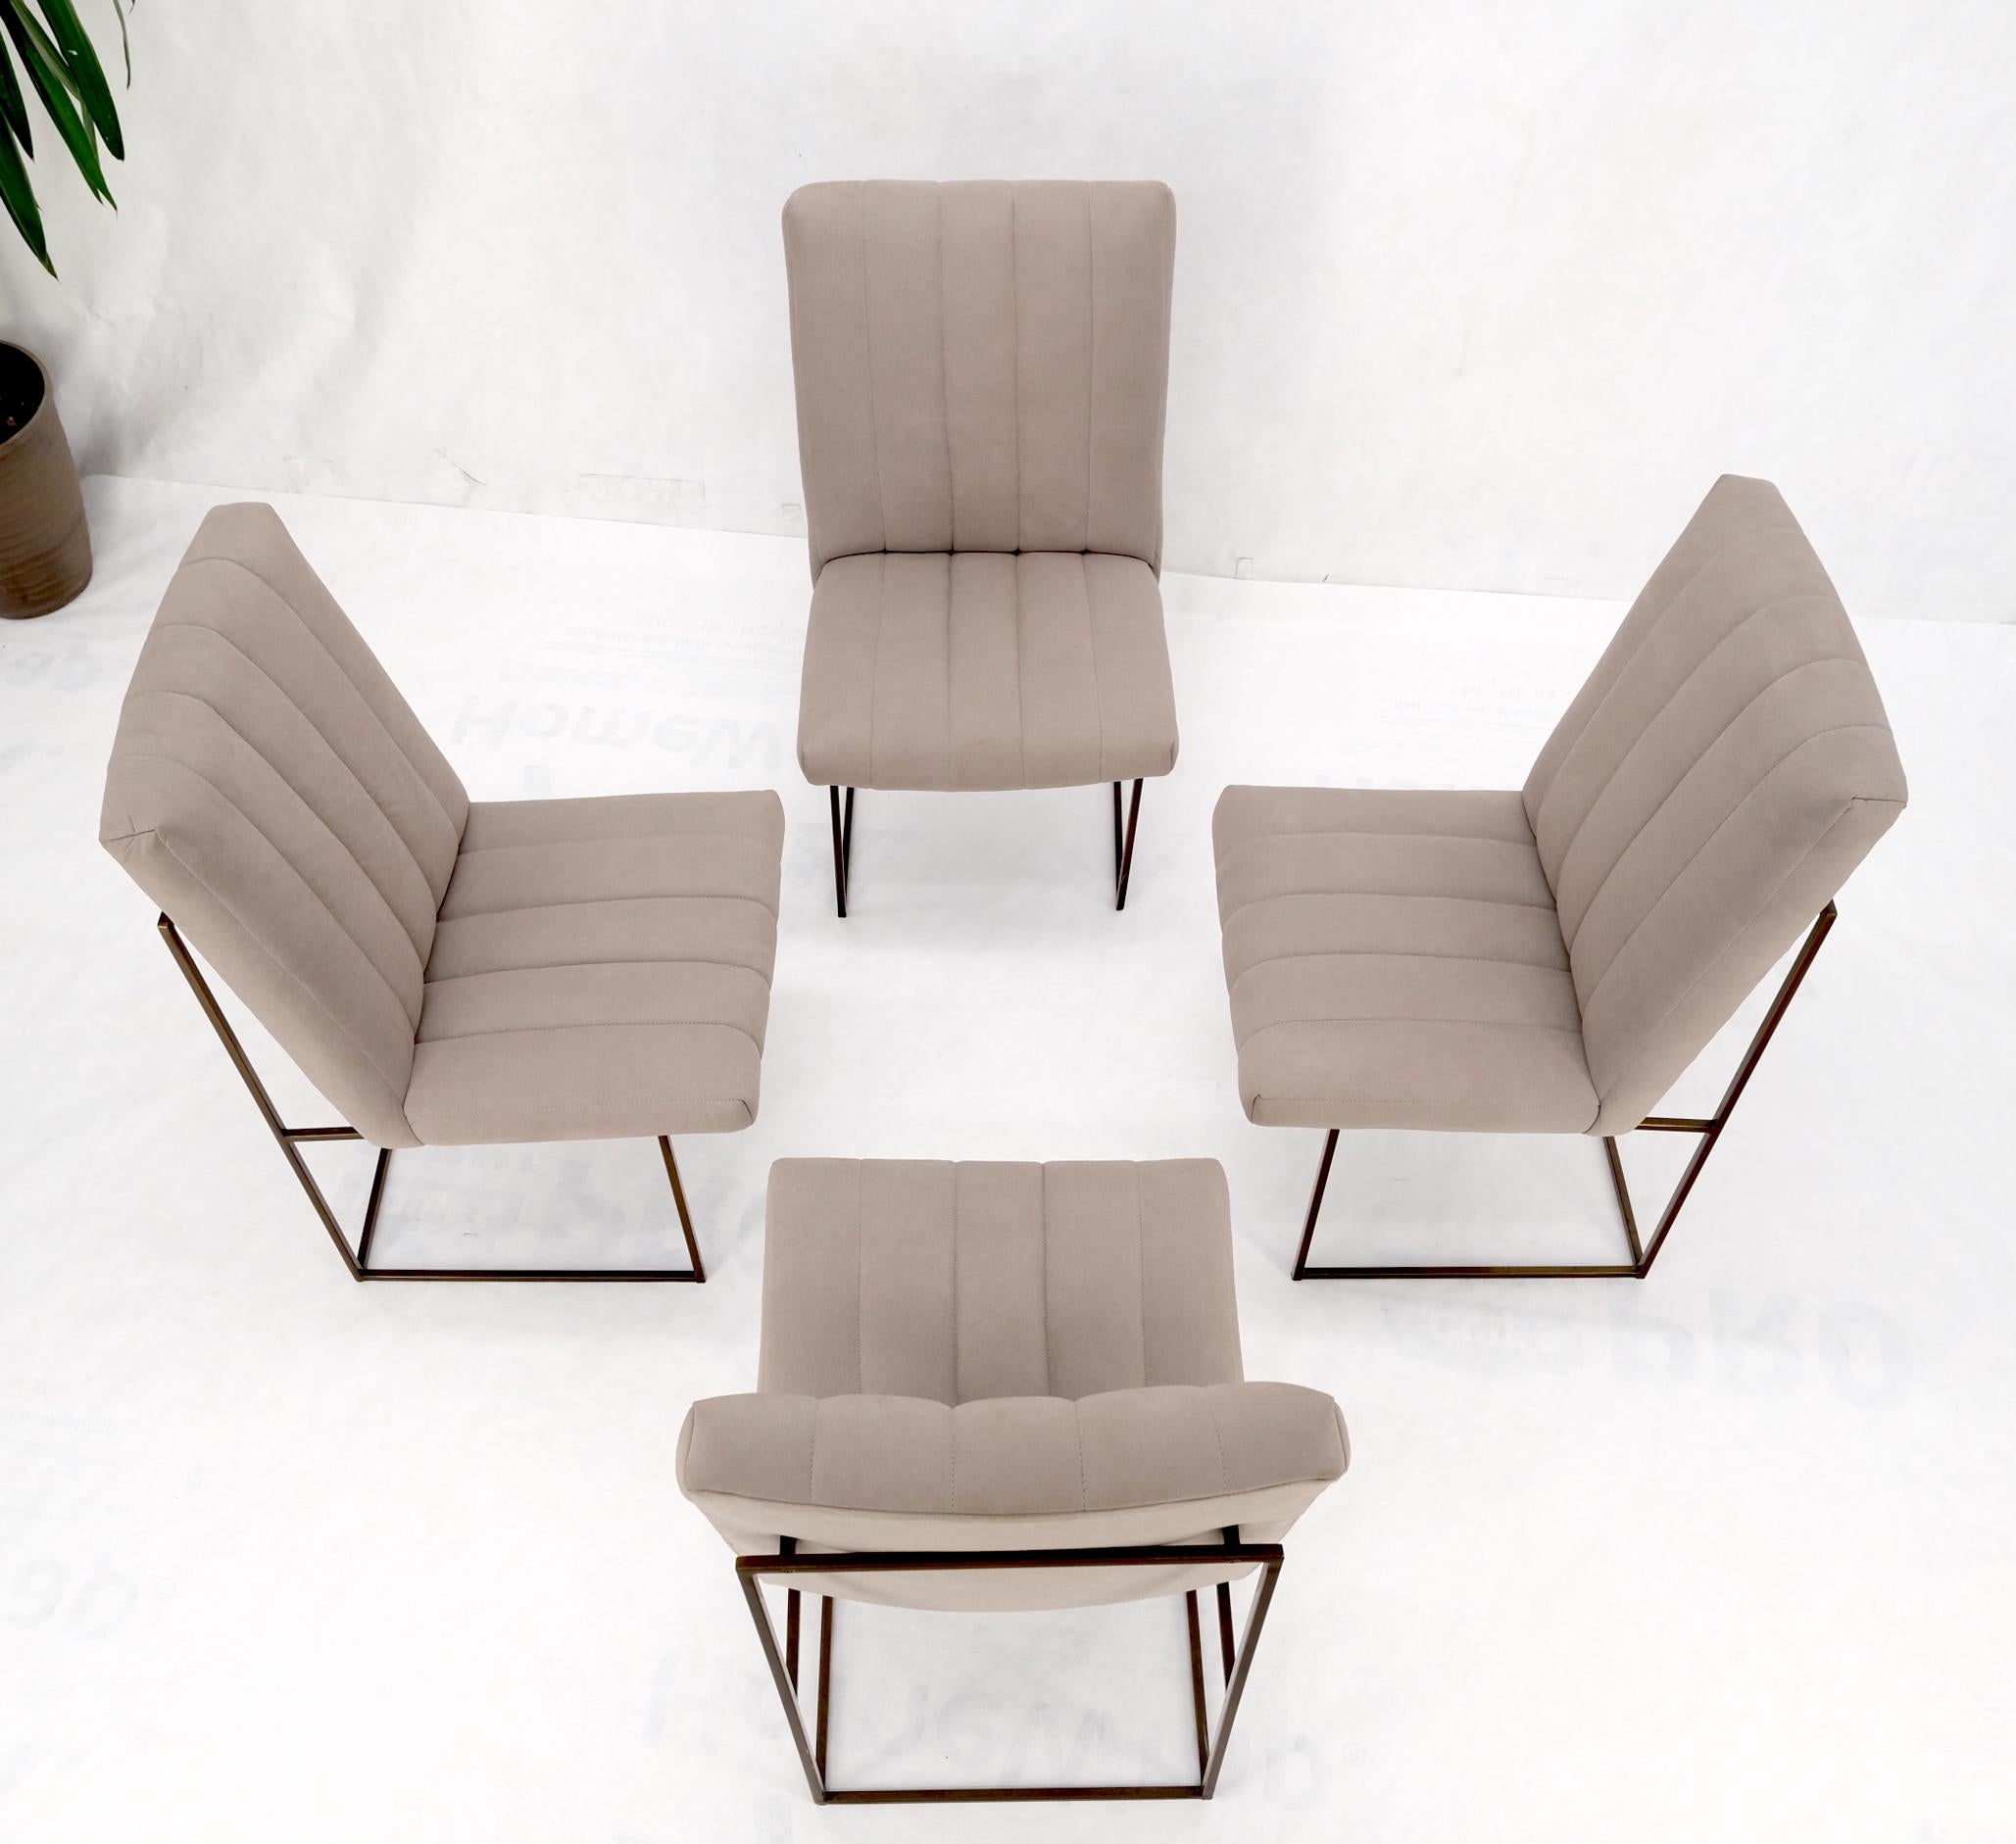 Set of 4 Milo Baughman Mid-Century Modern Dining Chairs New Alcantera Upholstery For Sale 3